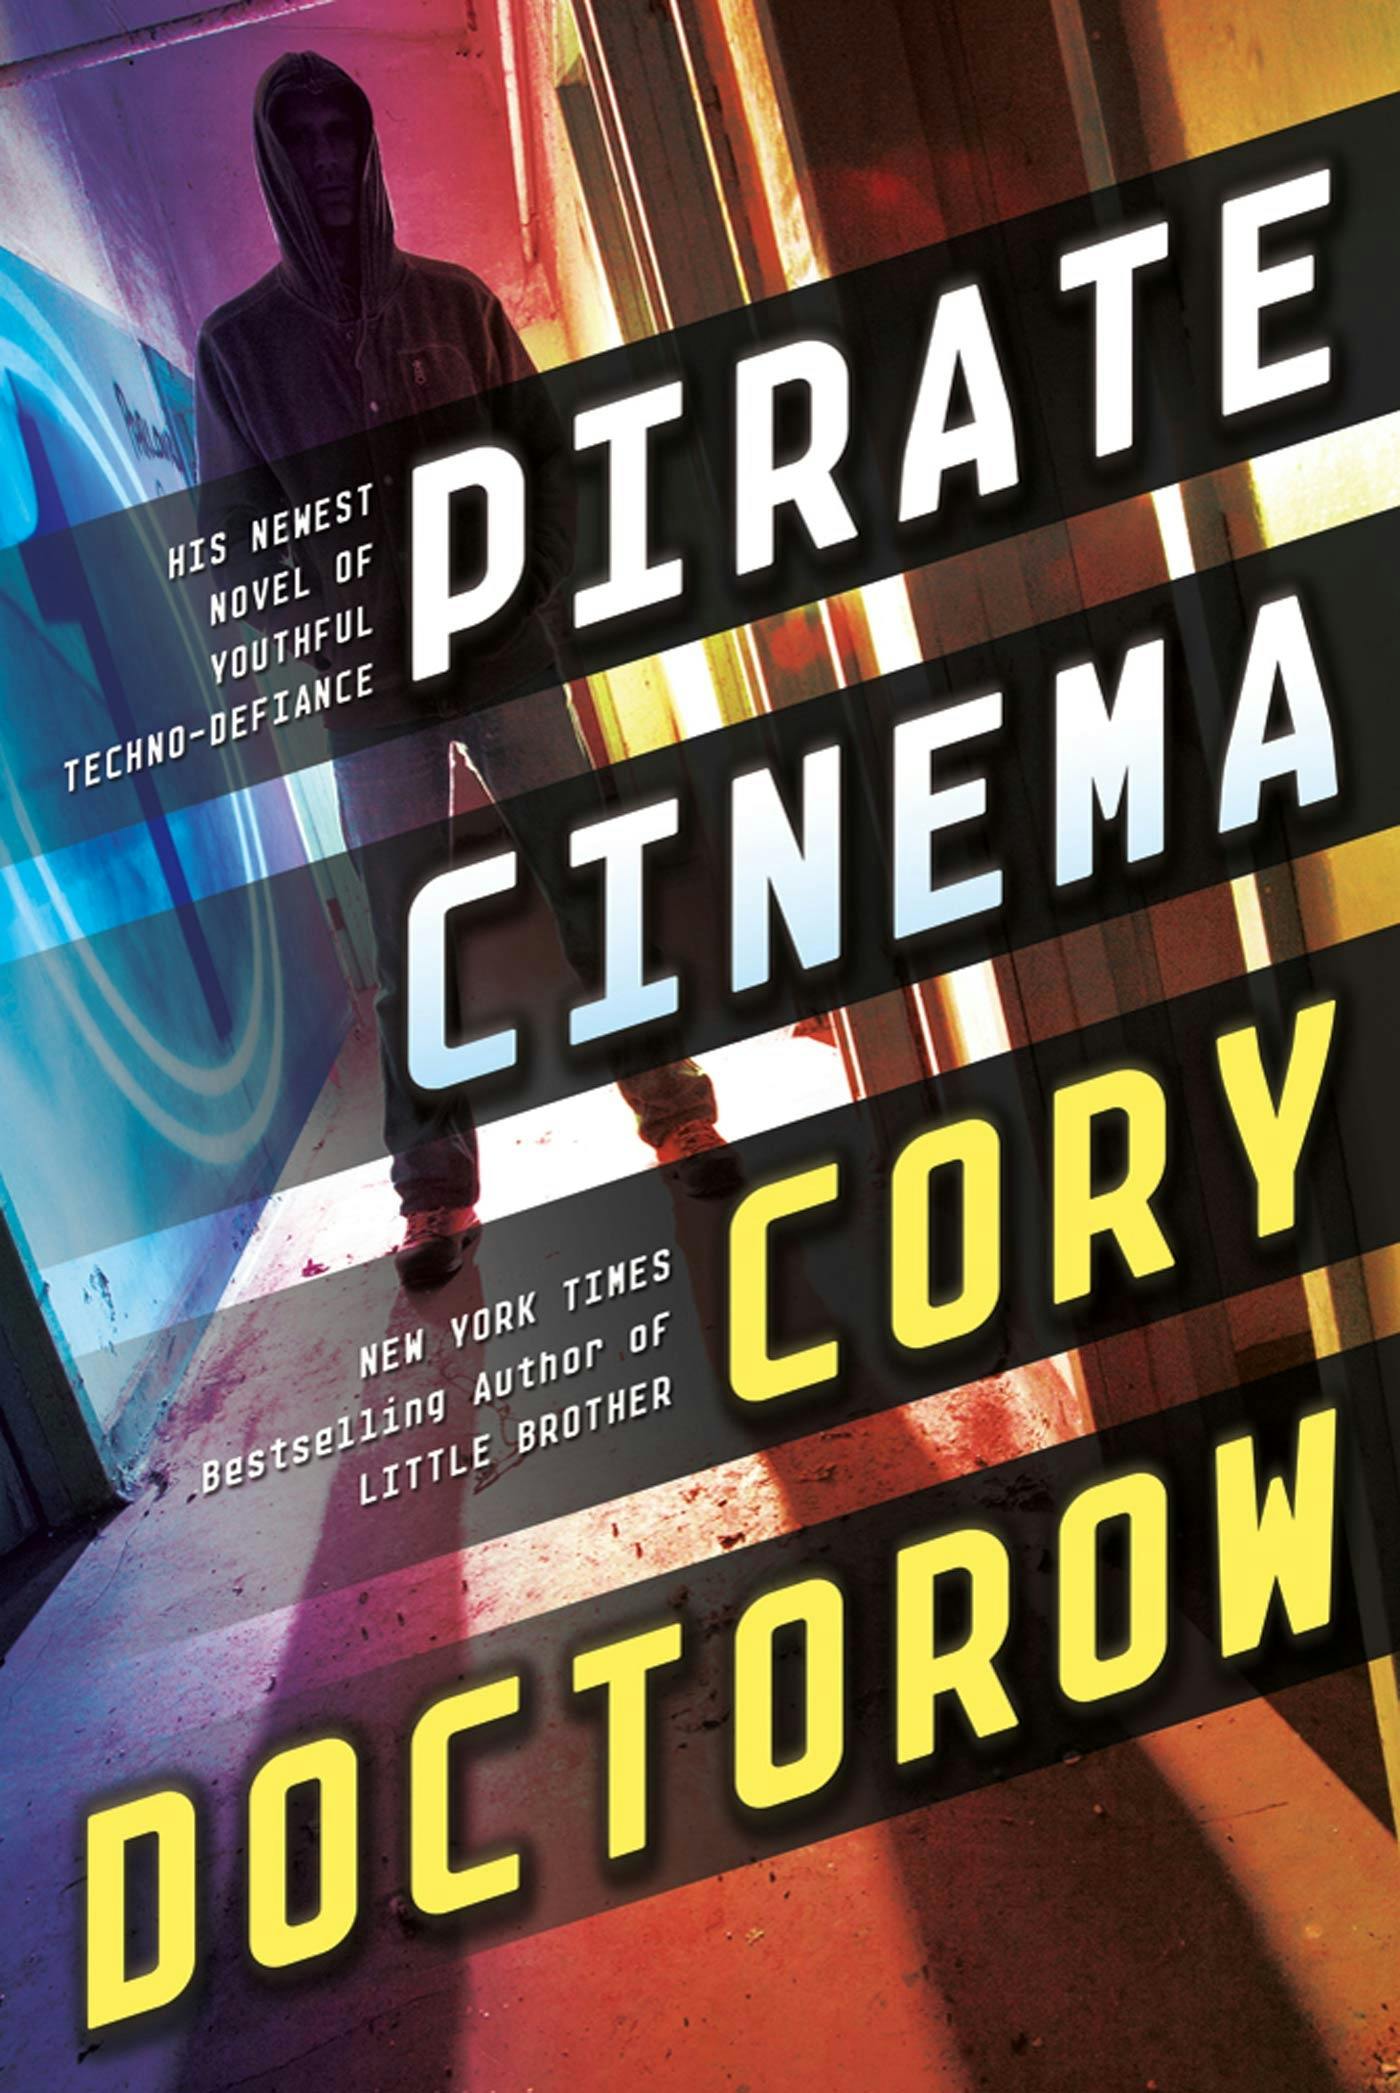 Cover for the book titled as: Pirate Cinema